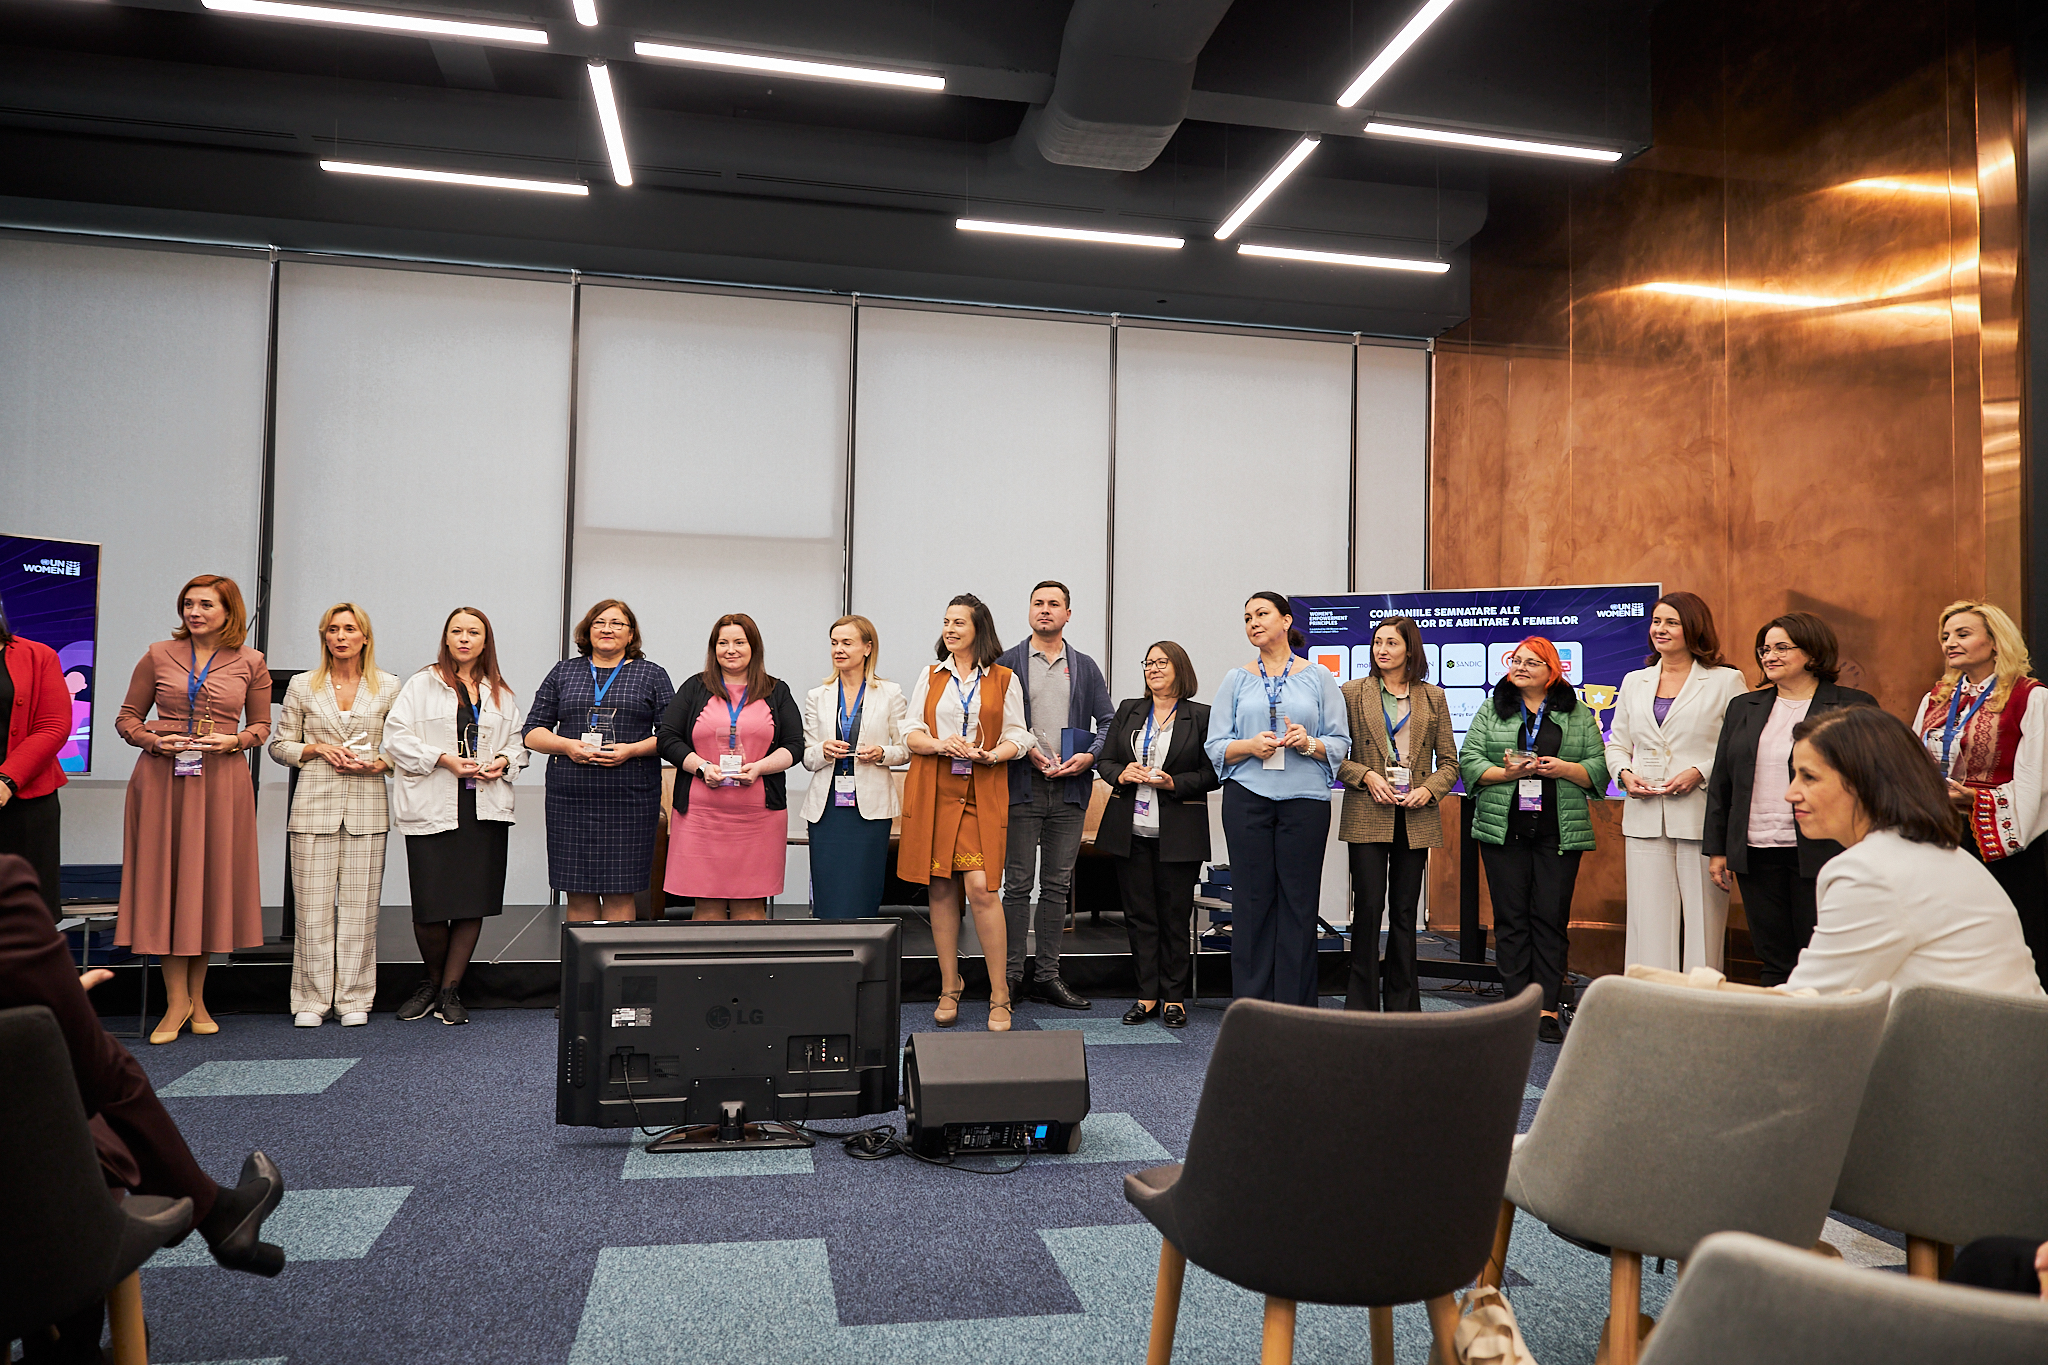 Seventeen companies from Moldova signed the Women’s Empowerment Principles at the national conference "Promoting gender equality in the workplace, on the market and in the community.” Photo: Daikiri studio, Life at Crunchyroll.